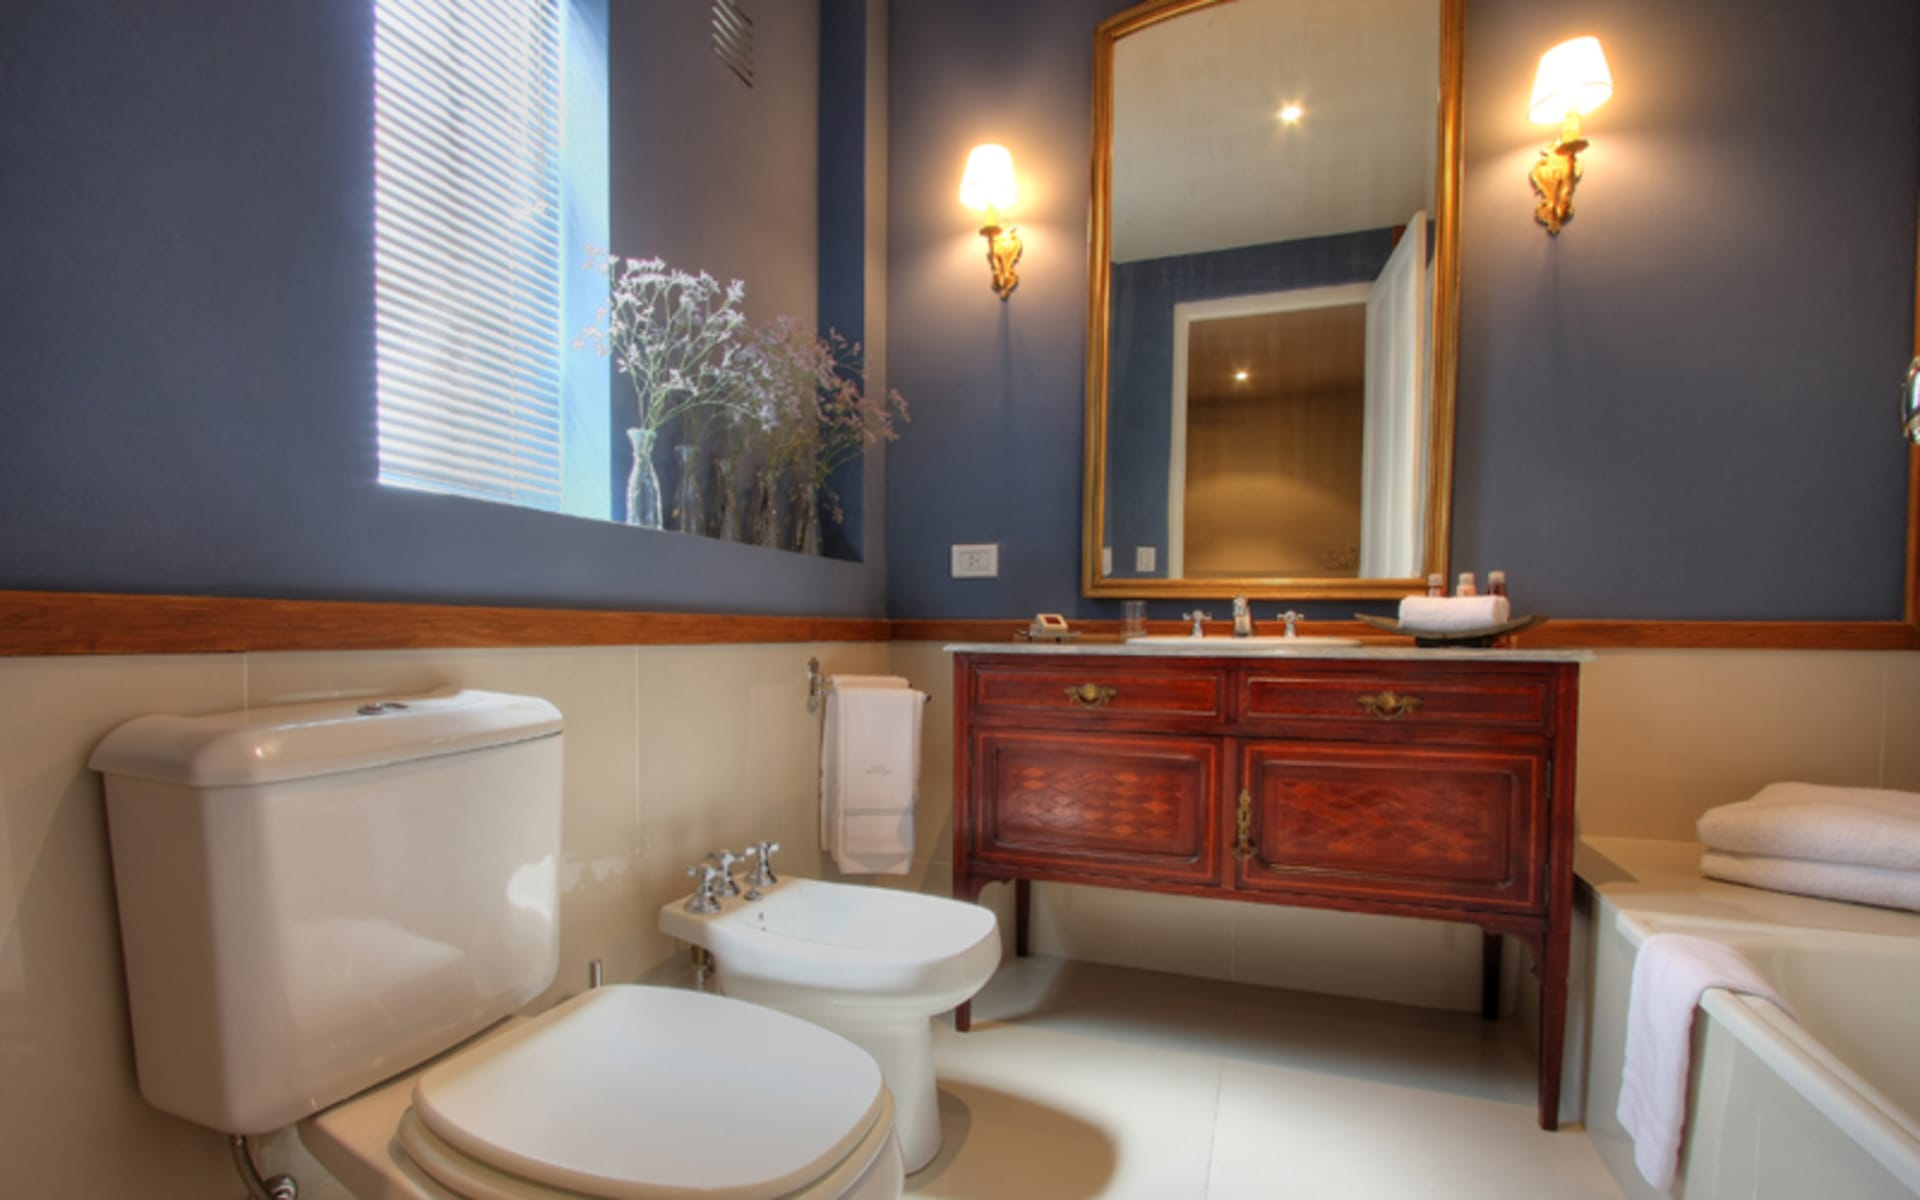 The bathroom has a wooden chest of drawers with a sink above it, a bathtub and a toilet. 